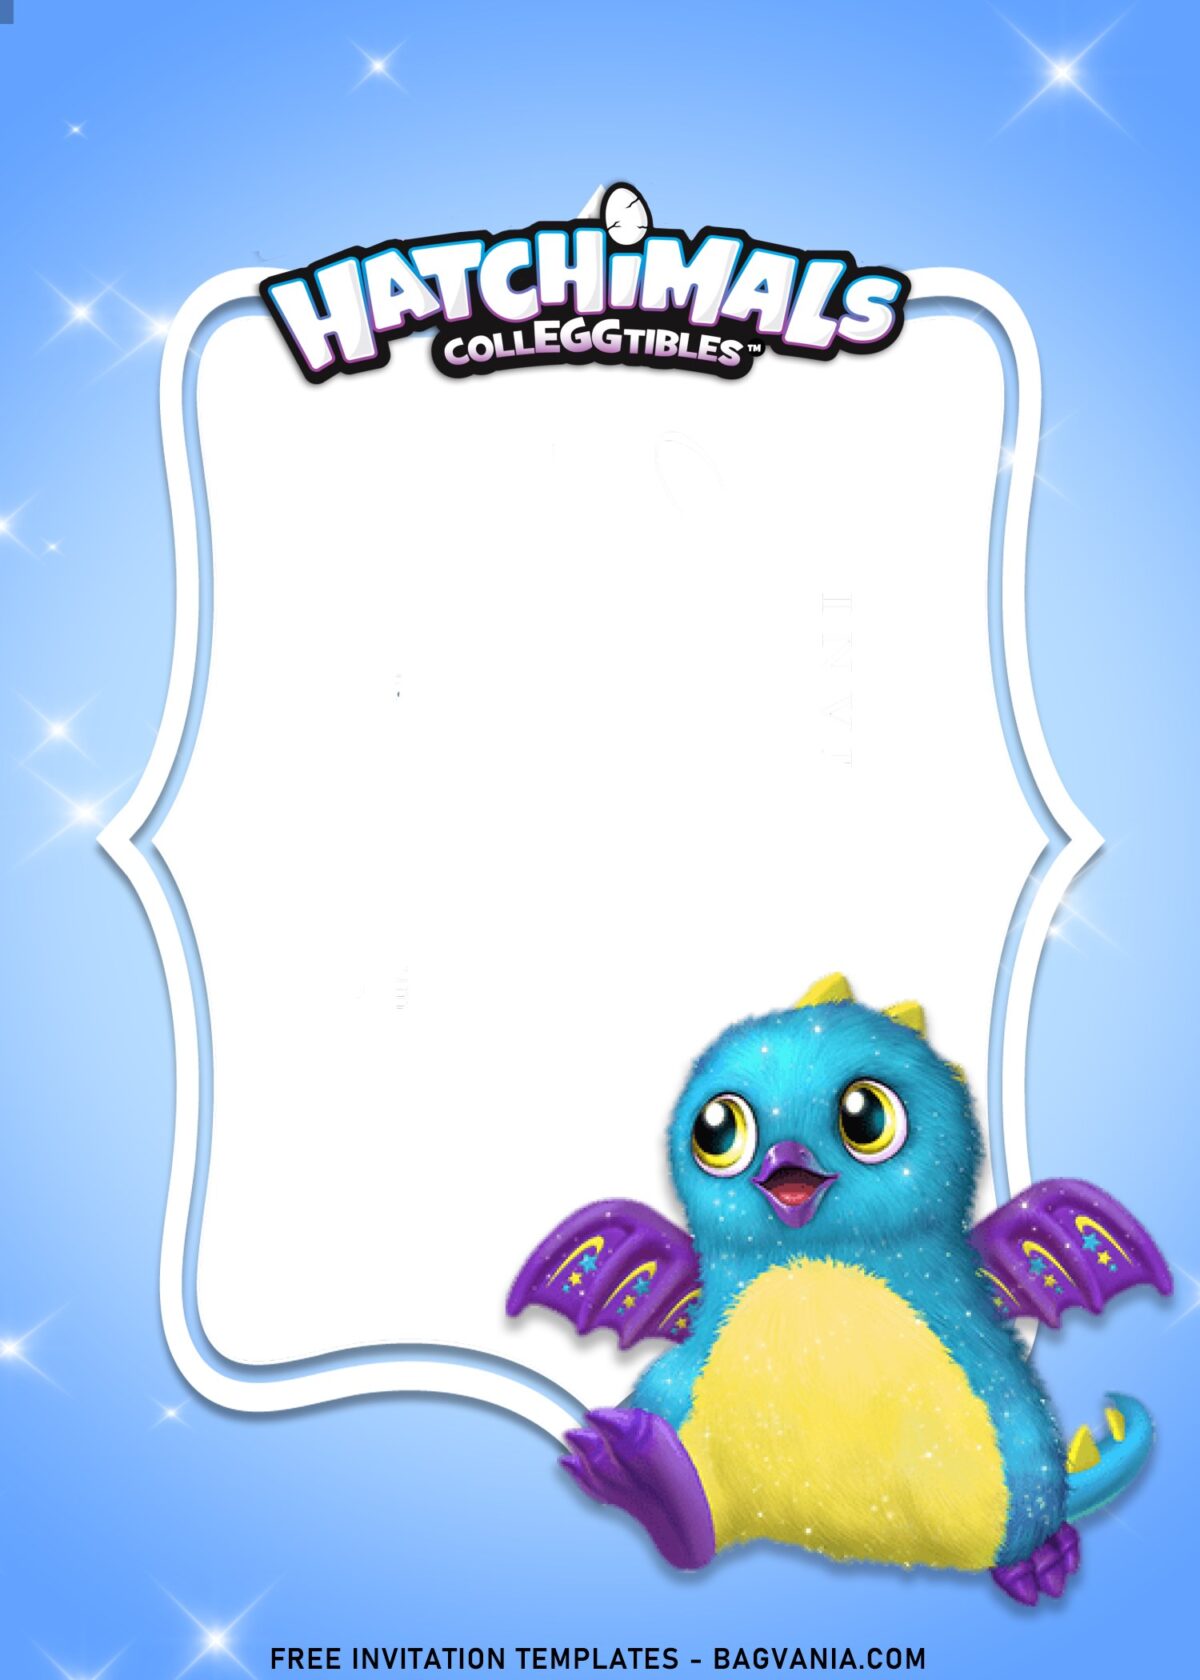 7+ Twinkly Cute Hatchimals Birthday Invitation Templates with adorable Penguin with wings